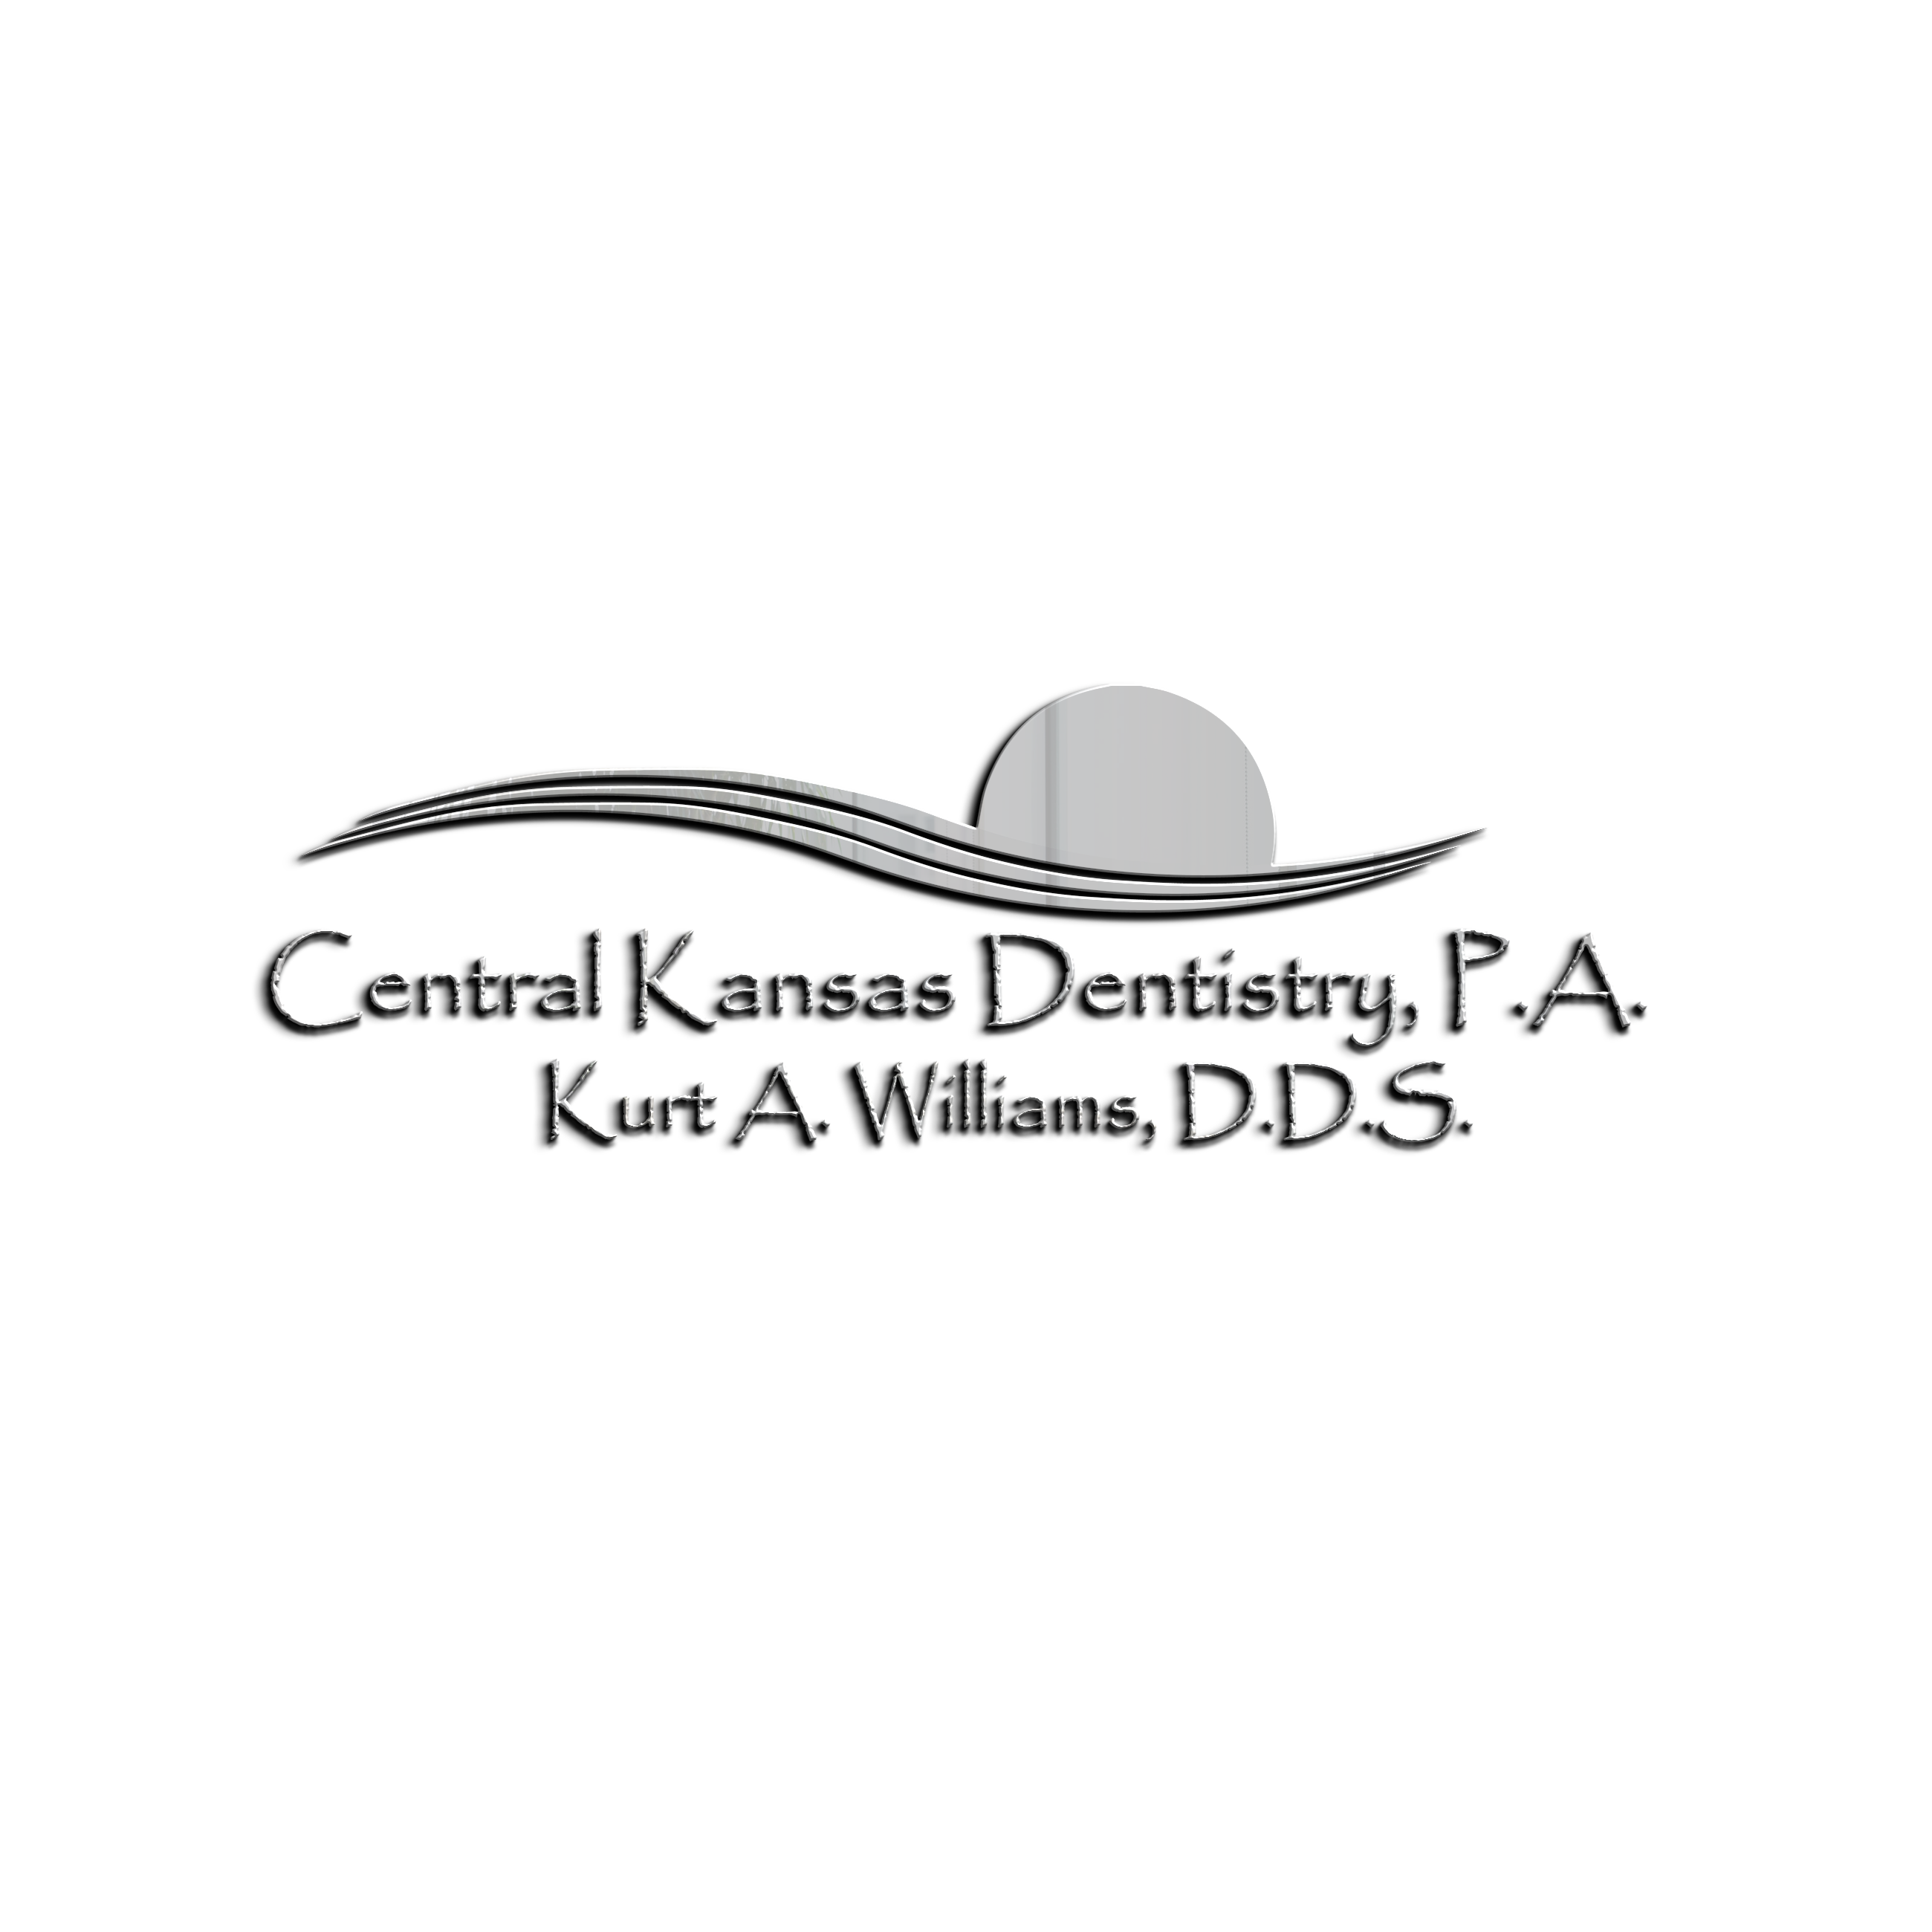 Central Kansas Dentistry, PA
Dr. Kurt A. Williams
202 North Douglas Avenue
Ellsworth, KS 67439
(785) 472-3803
https://www.cksmiles.com/

Serving patients in Ellsworth, Great Bend, Salina, Russell, Hays, and surrounding areas